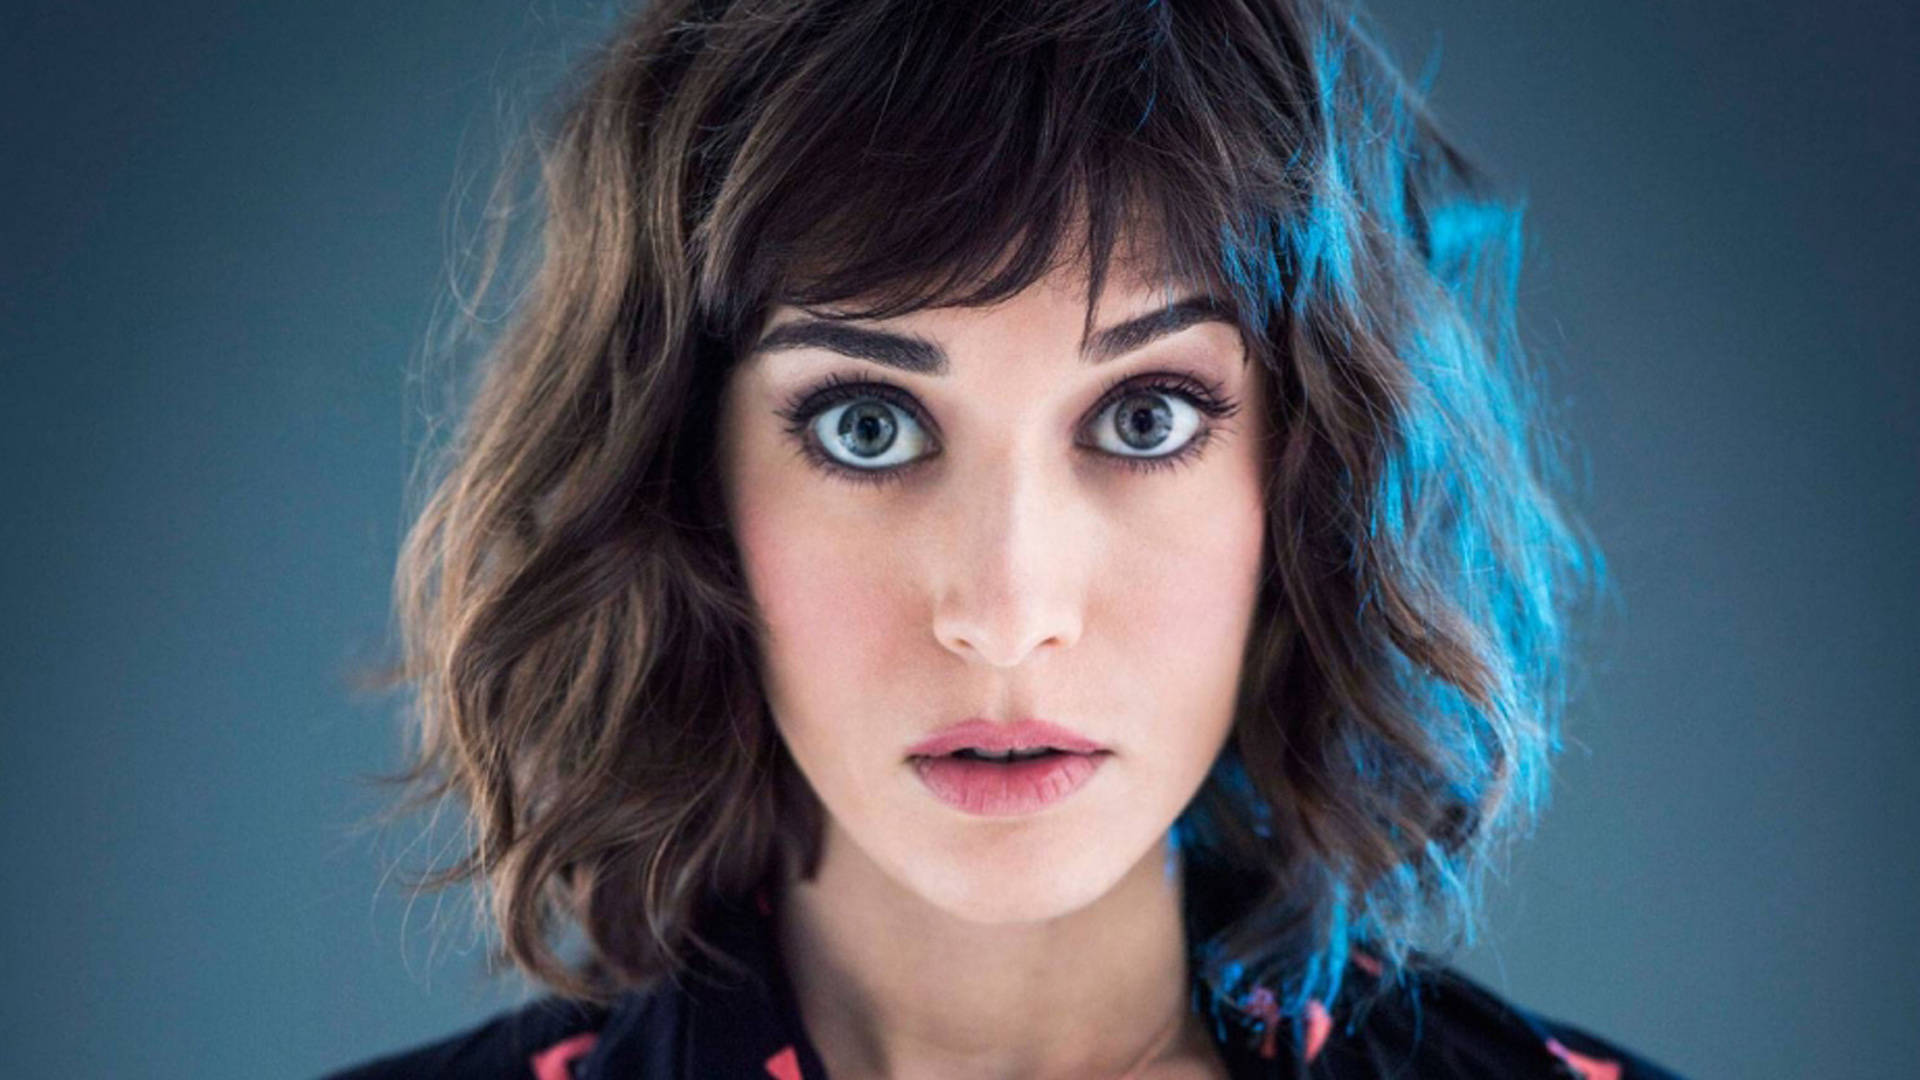 Lizzy Caplan With A Wide-eyed Look Wallpaper